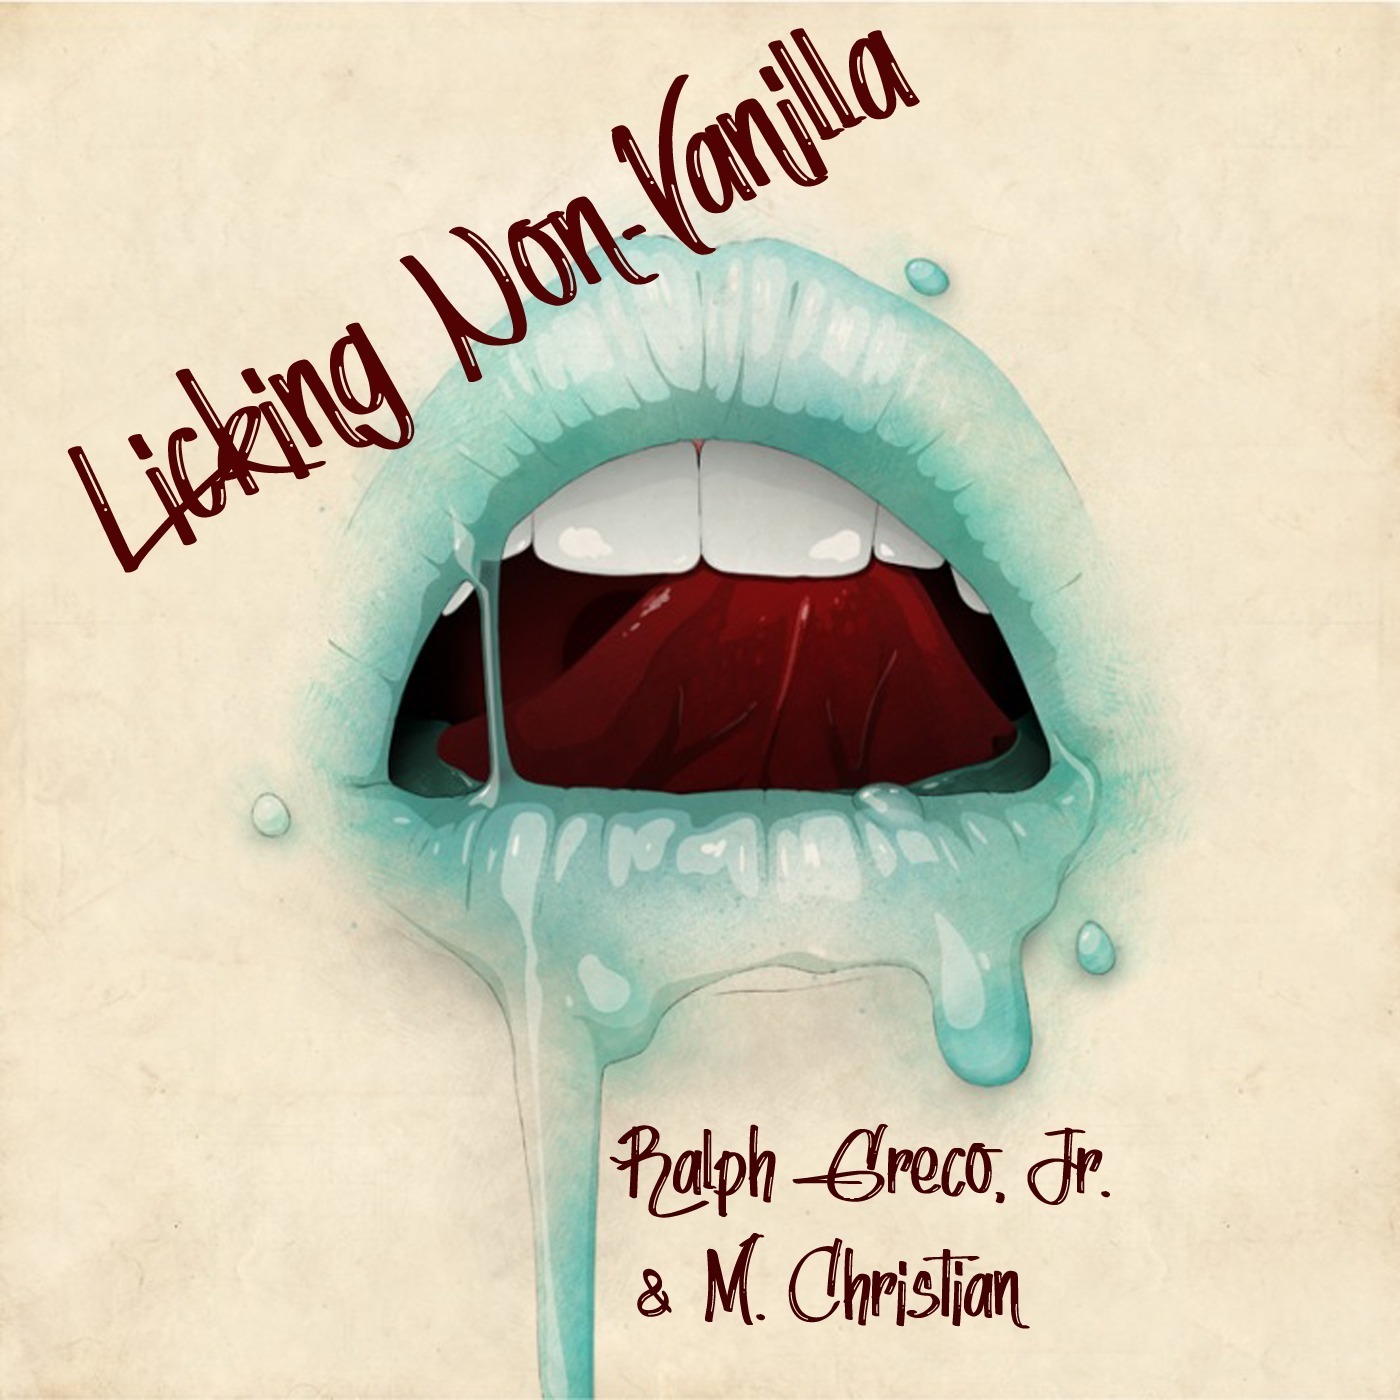 Licking Non-Vanilla - 13-Chris and Ralph learn about the good, bad and unusual of sex talking with Dr. Lori Beth Bisbey